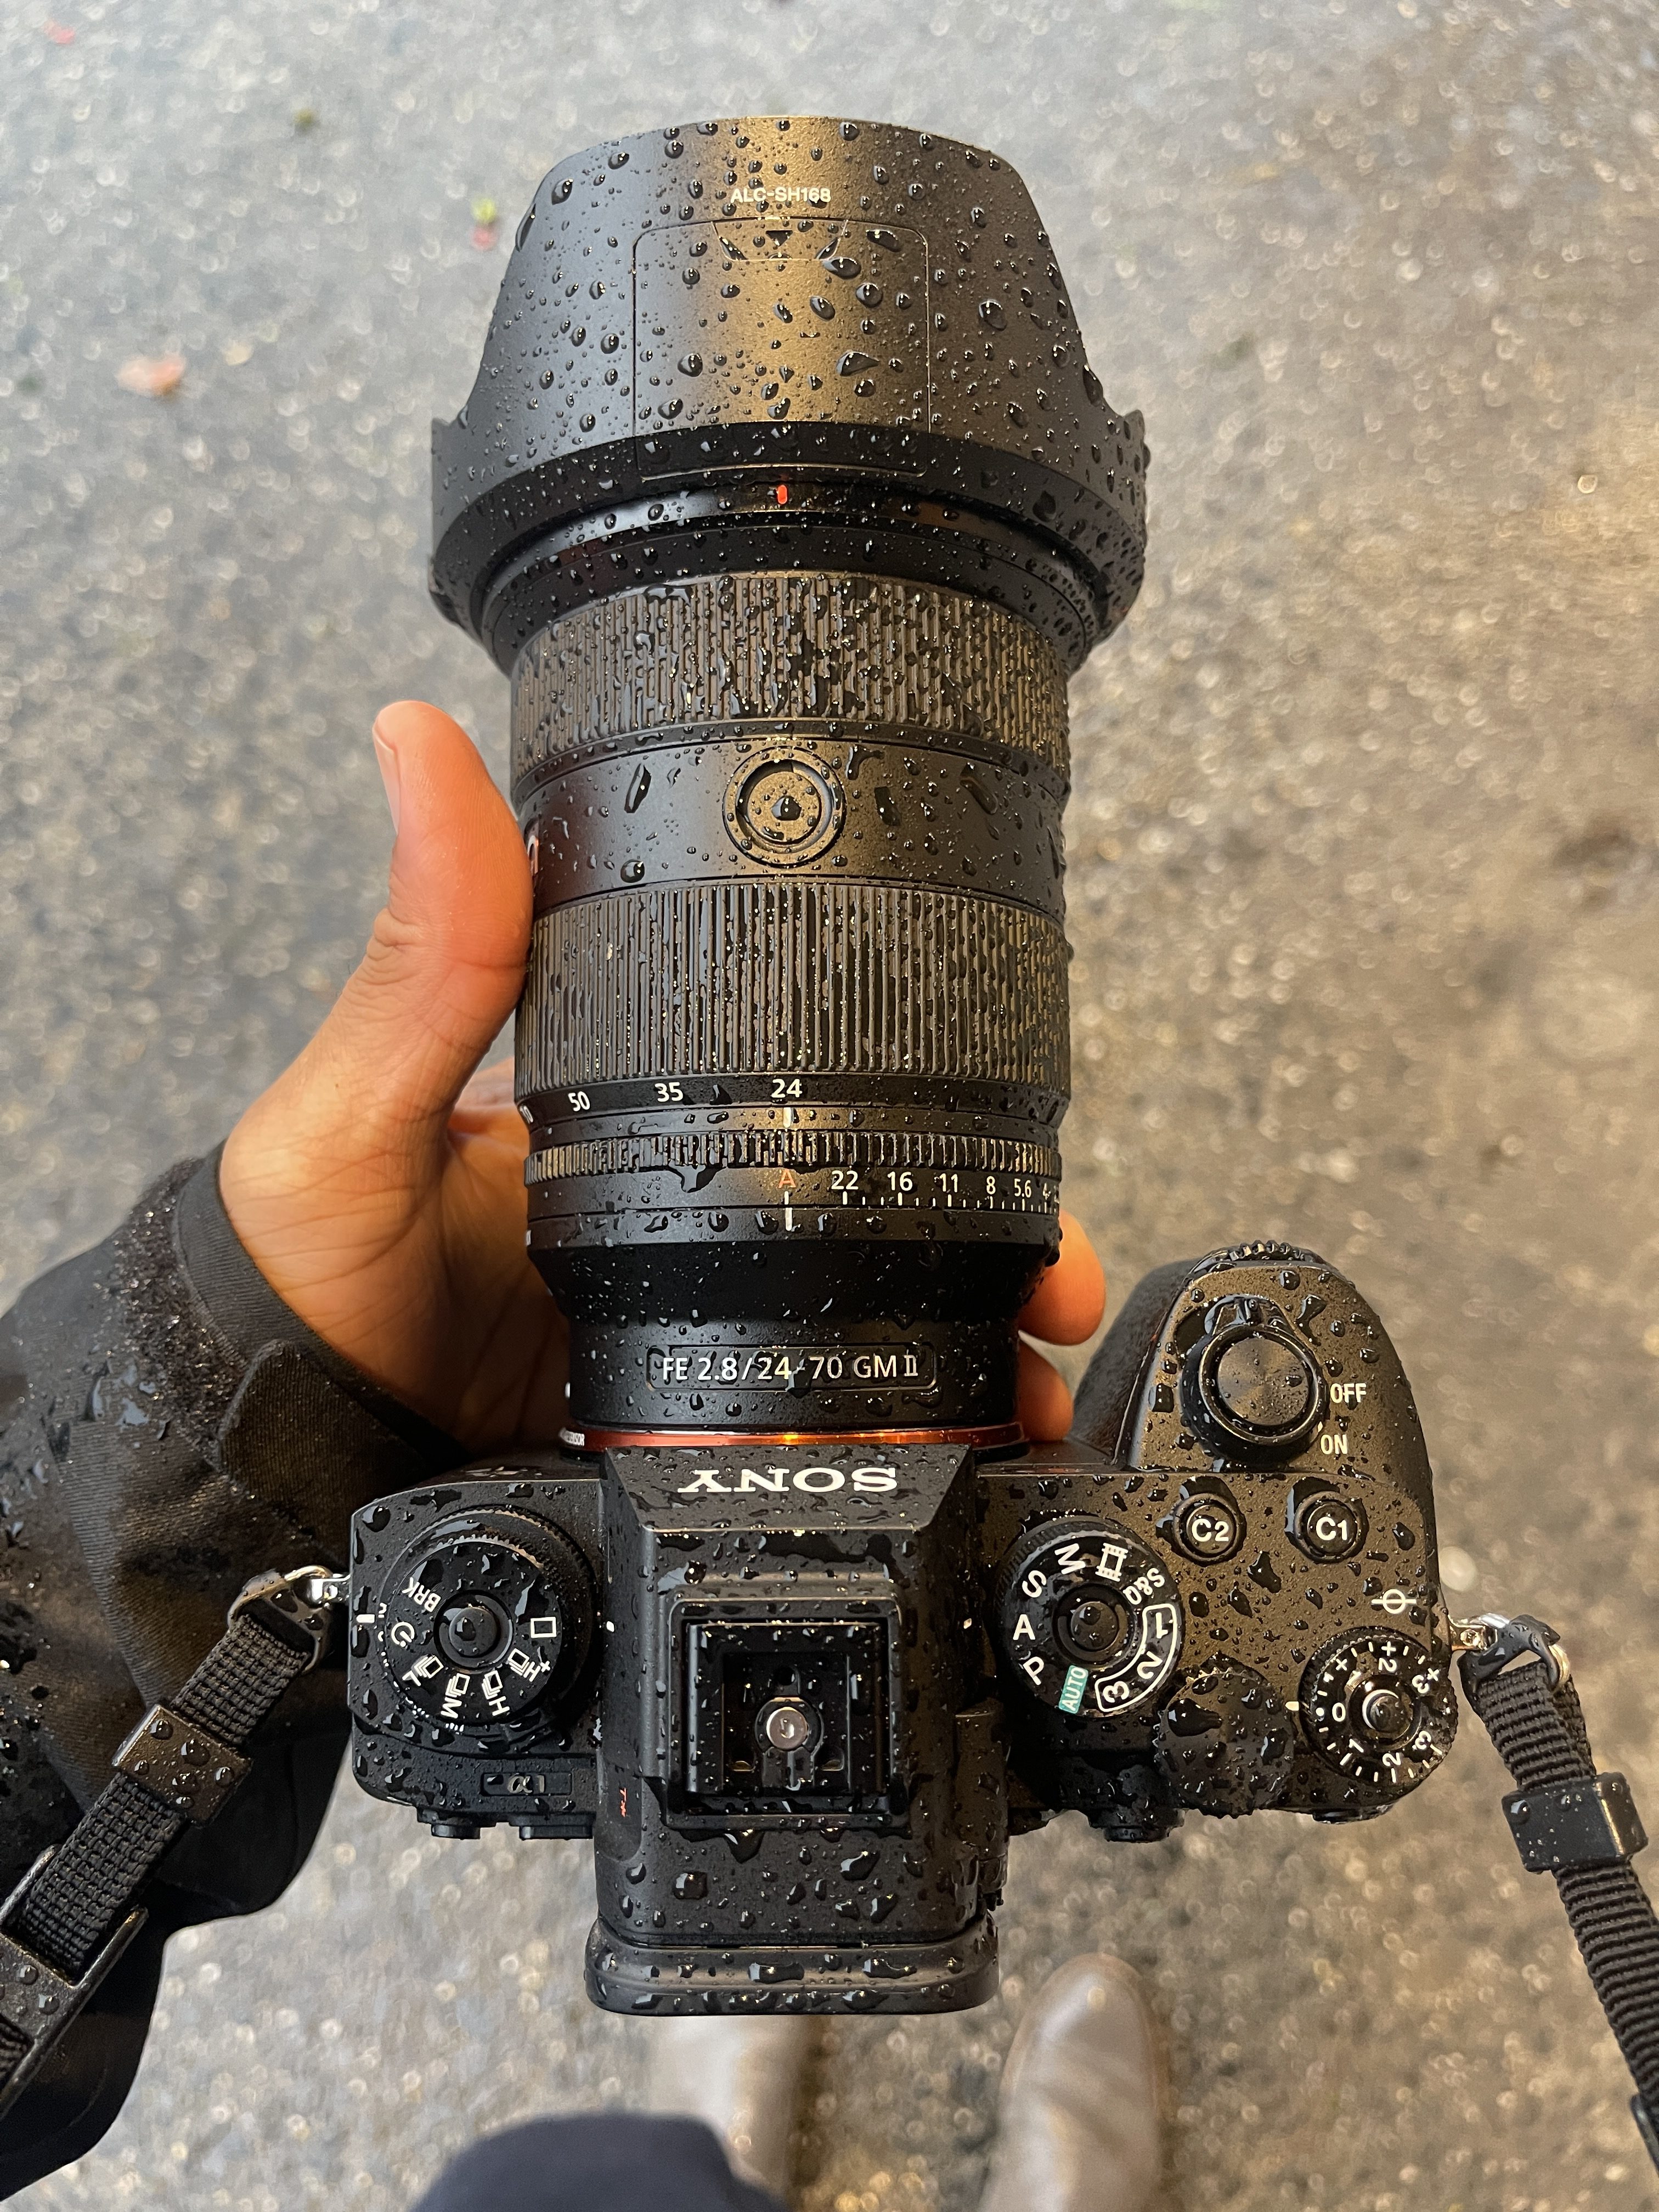 Sony 24-70mm f2.8 G Master II Review